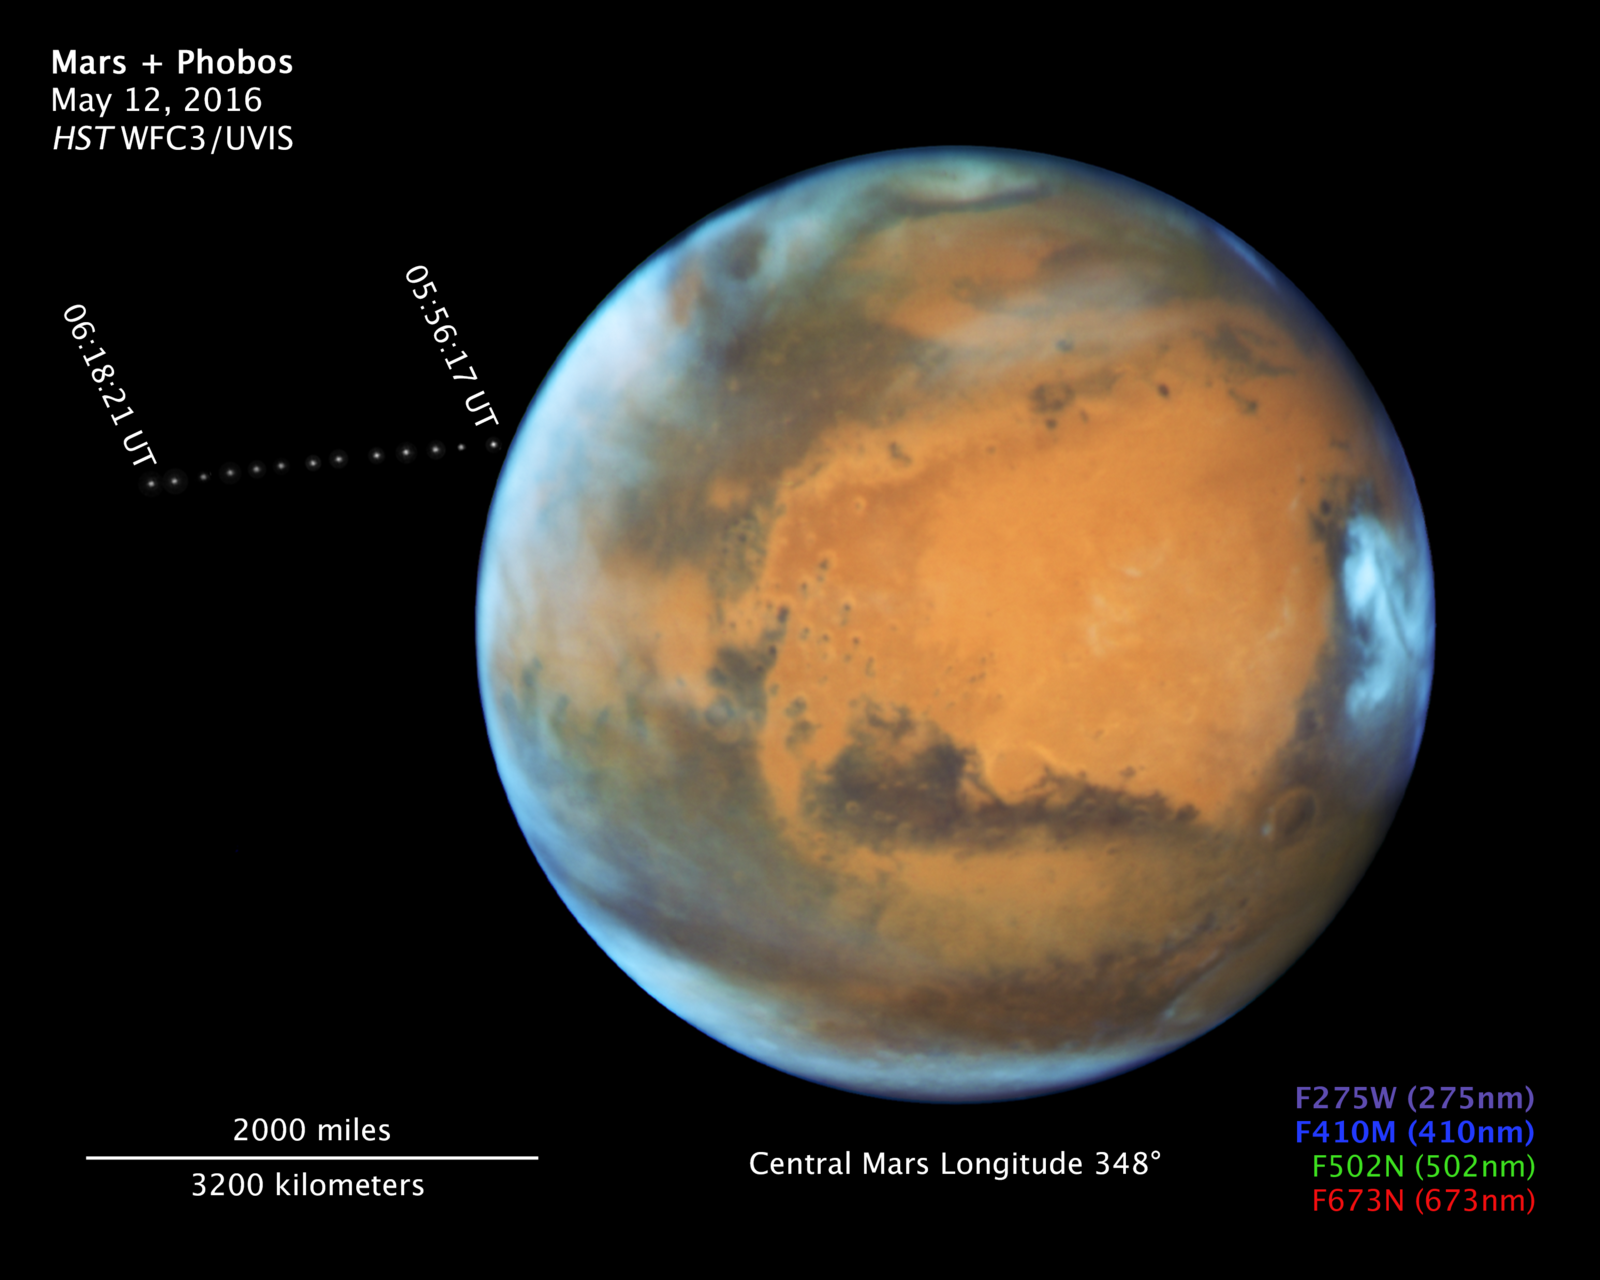 While photographing Mars, NASA's Hubble Space Telescope captured a cameo appearance of the tiny moon Phobos on its trek around the Red Planet. Discovered in 1877, the diminutive, potato-shaped moon is so small that it appears star-like in the Hubble pictures. Phobos orbits Mars in just 7 hours and 39 minutes, which is faster than Mars rotates. The moon's orbit is very slowly shrinking, meaning it will eventually shatter under Mars' gravitational pull, or crash onto the planet. Hubble took 13 separate exposures over 22 minutes to create a time-lapse video showing the moon's orbital path.